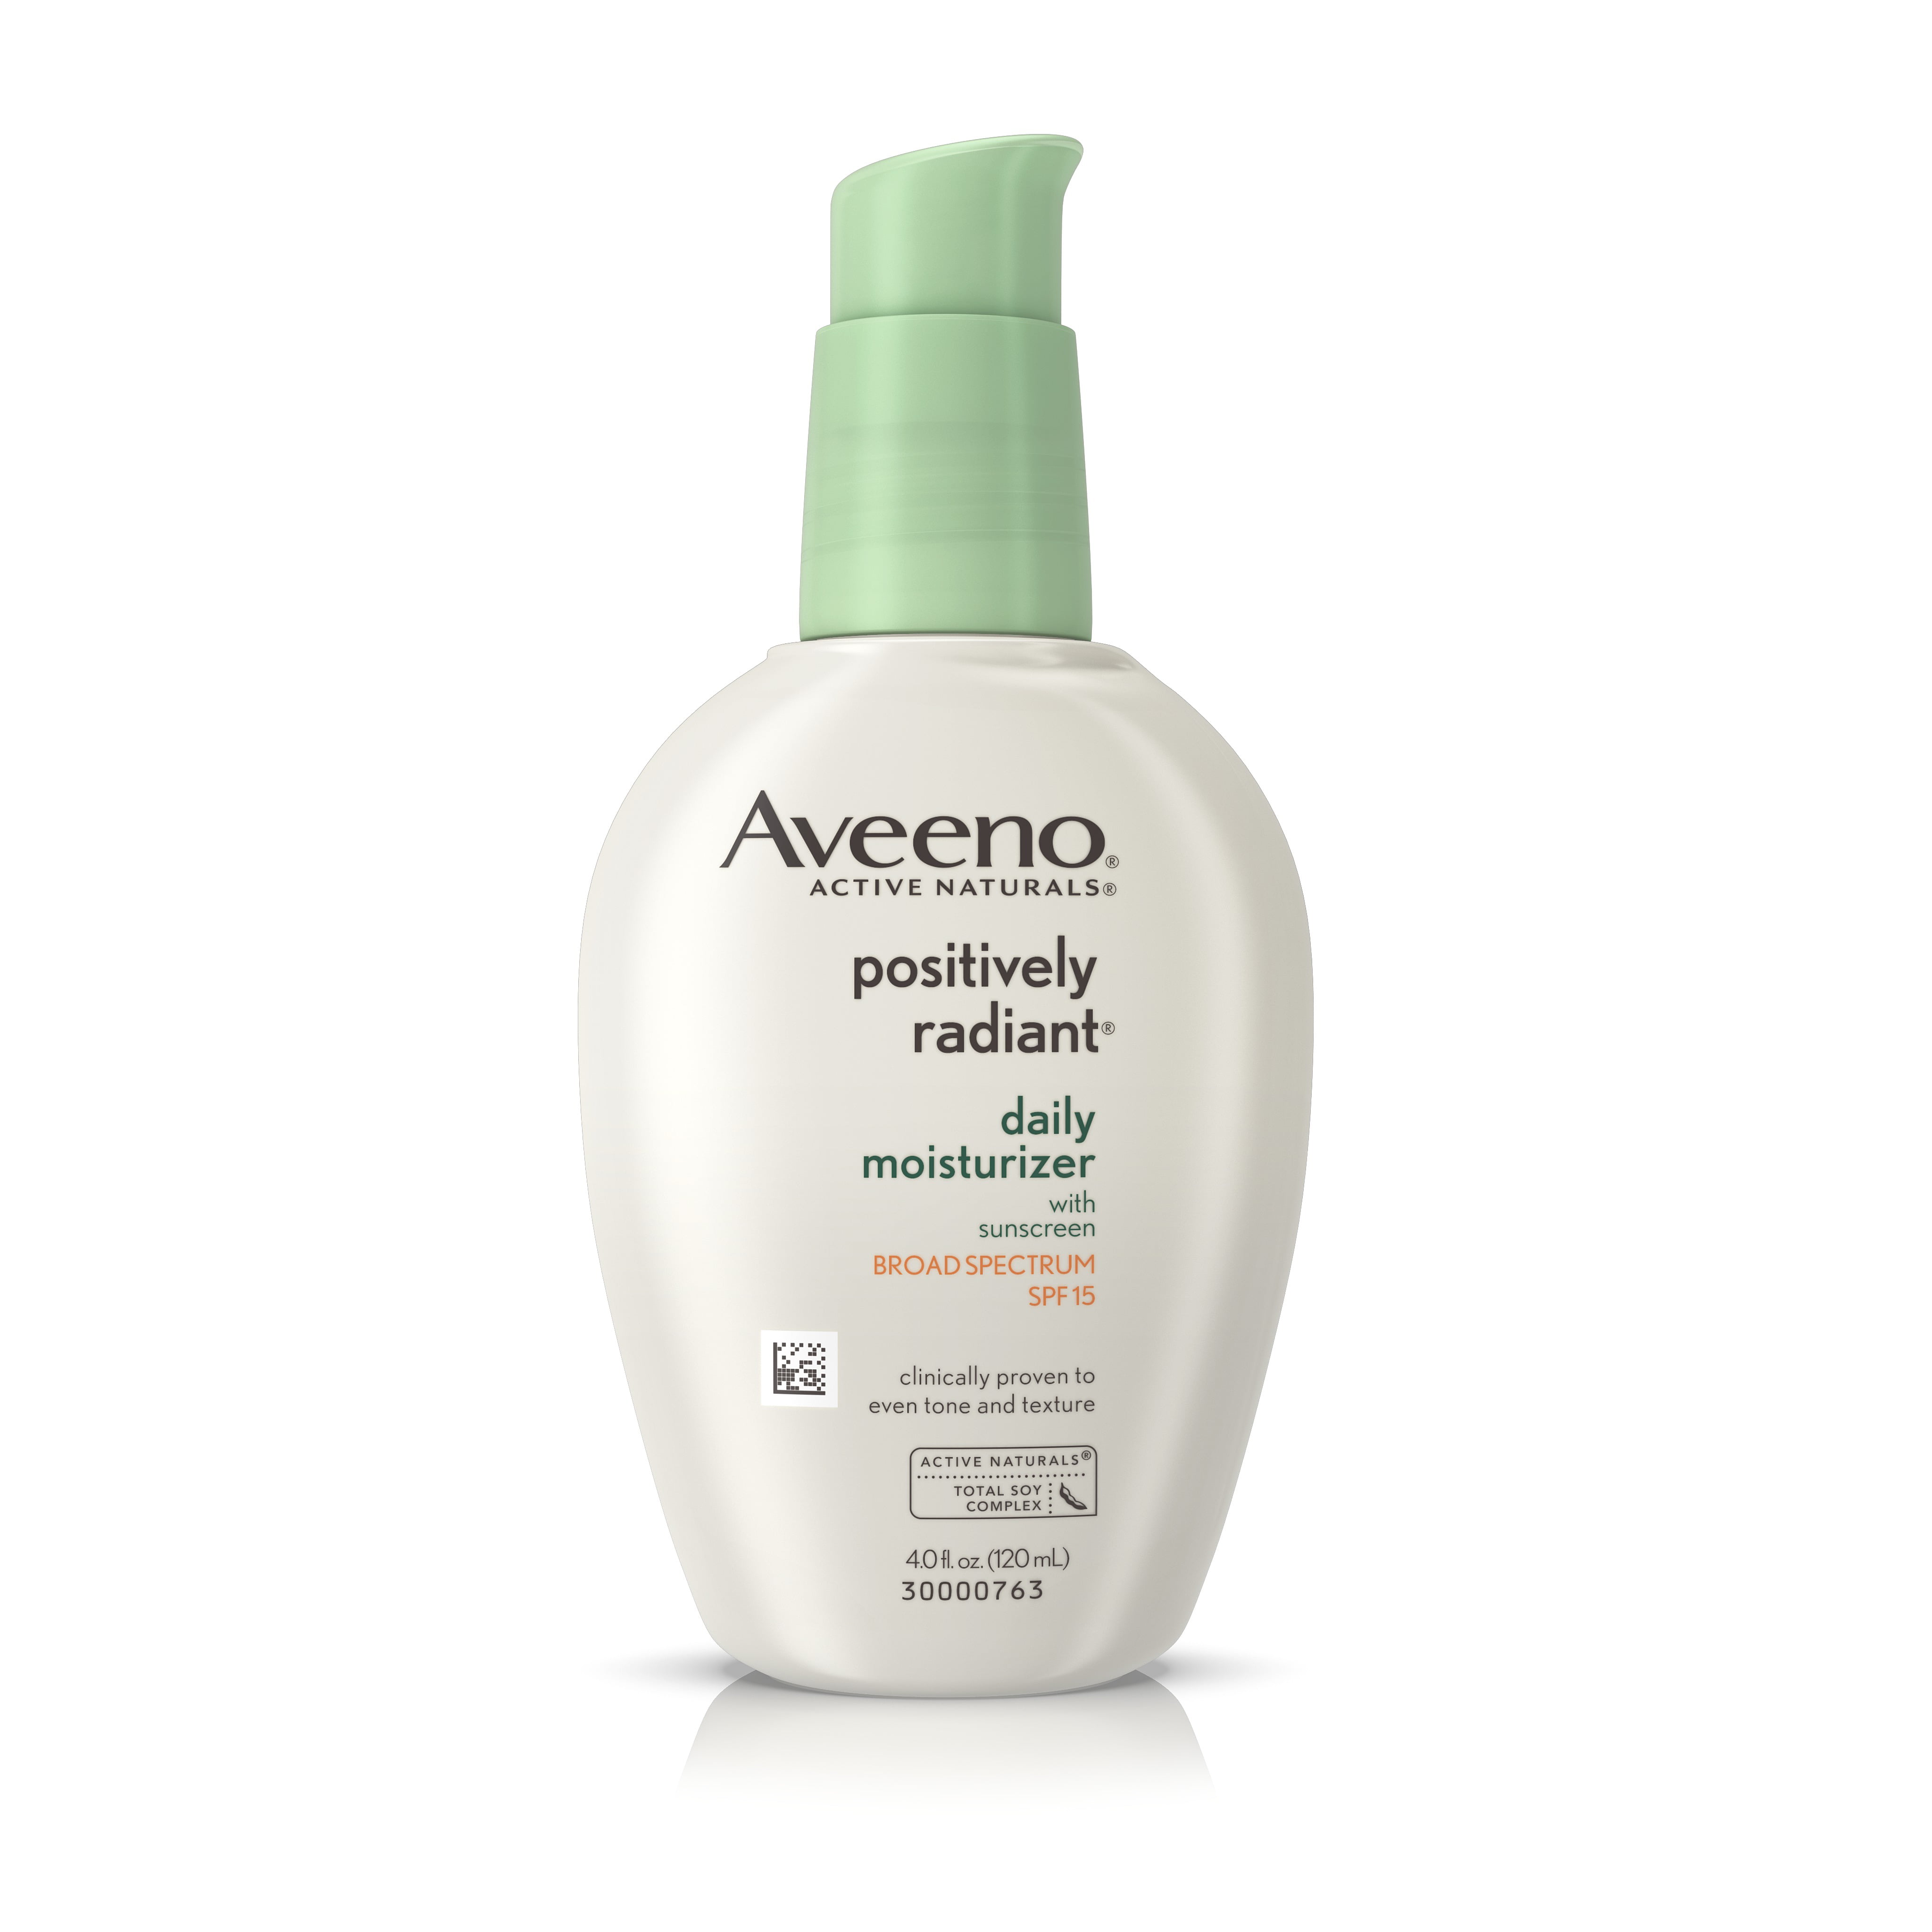 Facial lotion with spf